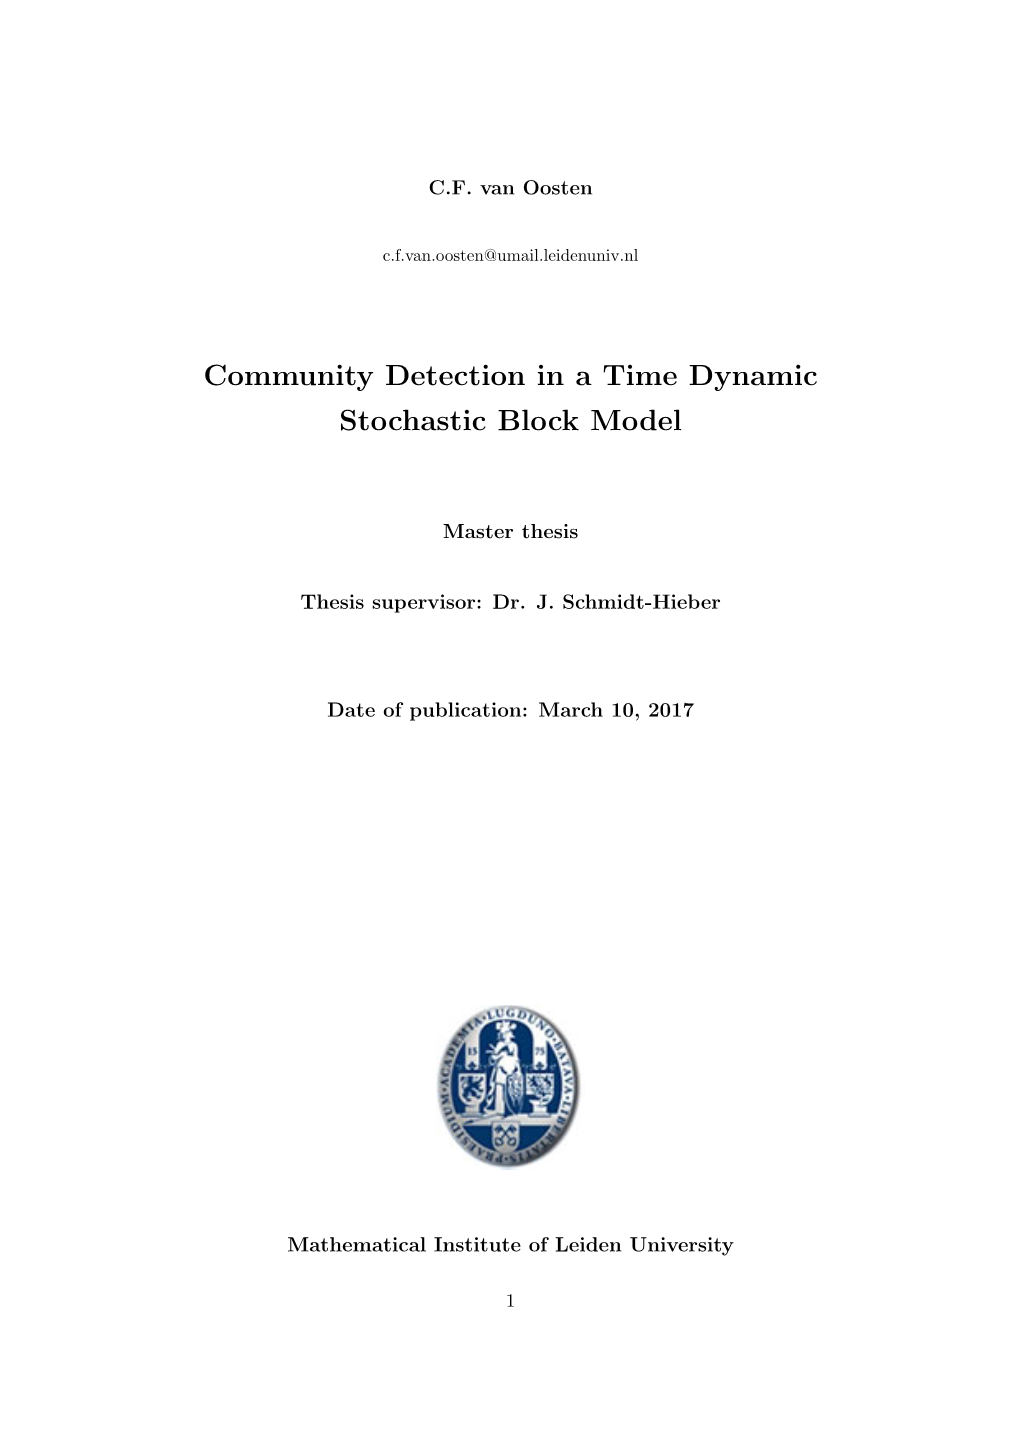 Community Detection in a Time Dynamic Stochastic Block Model